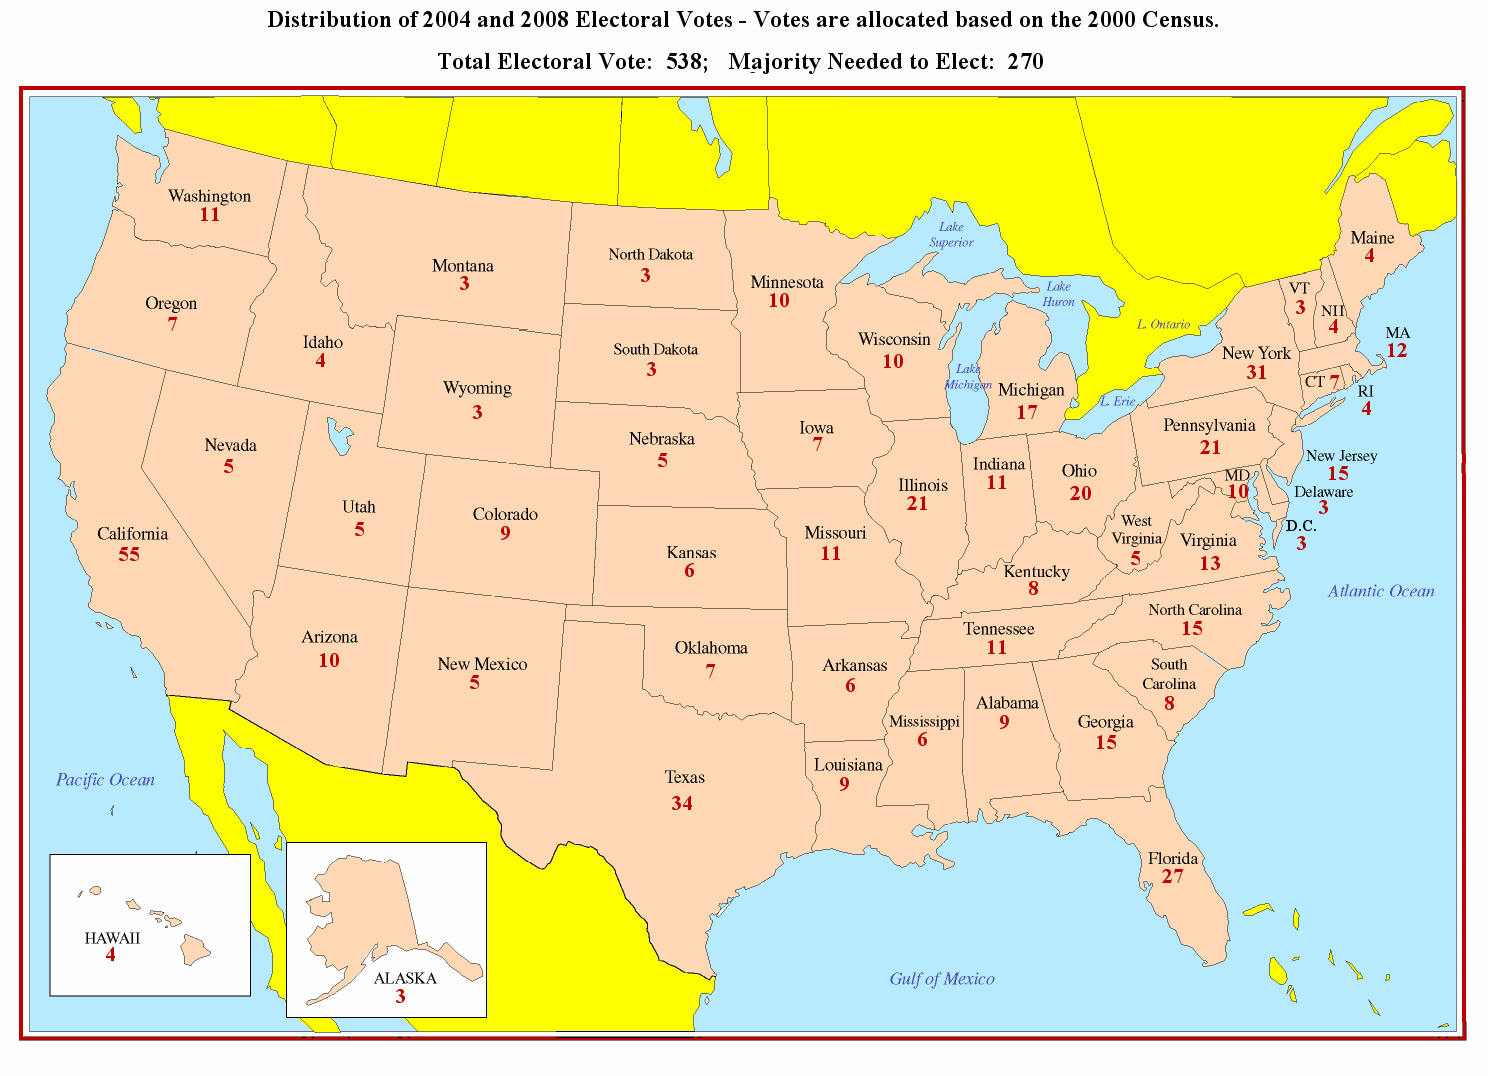 United States Map States And Capitals